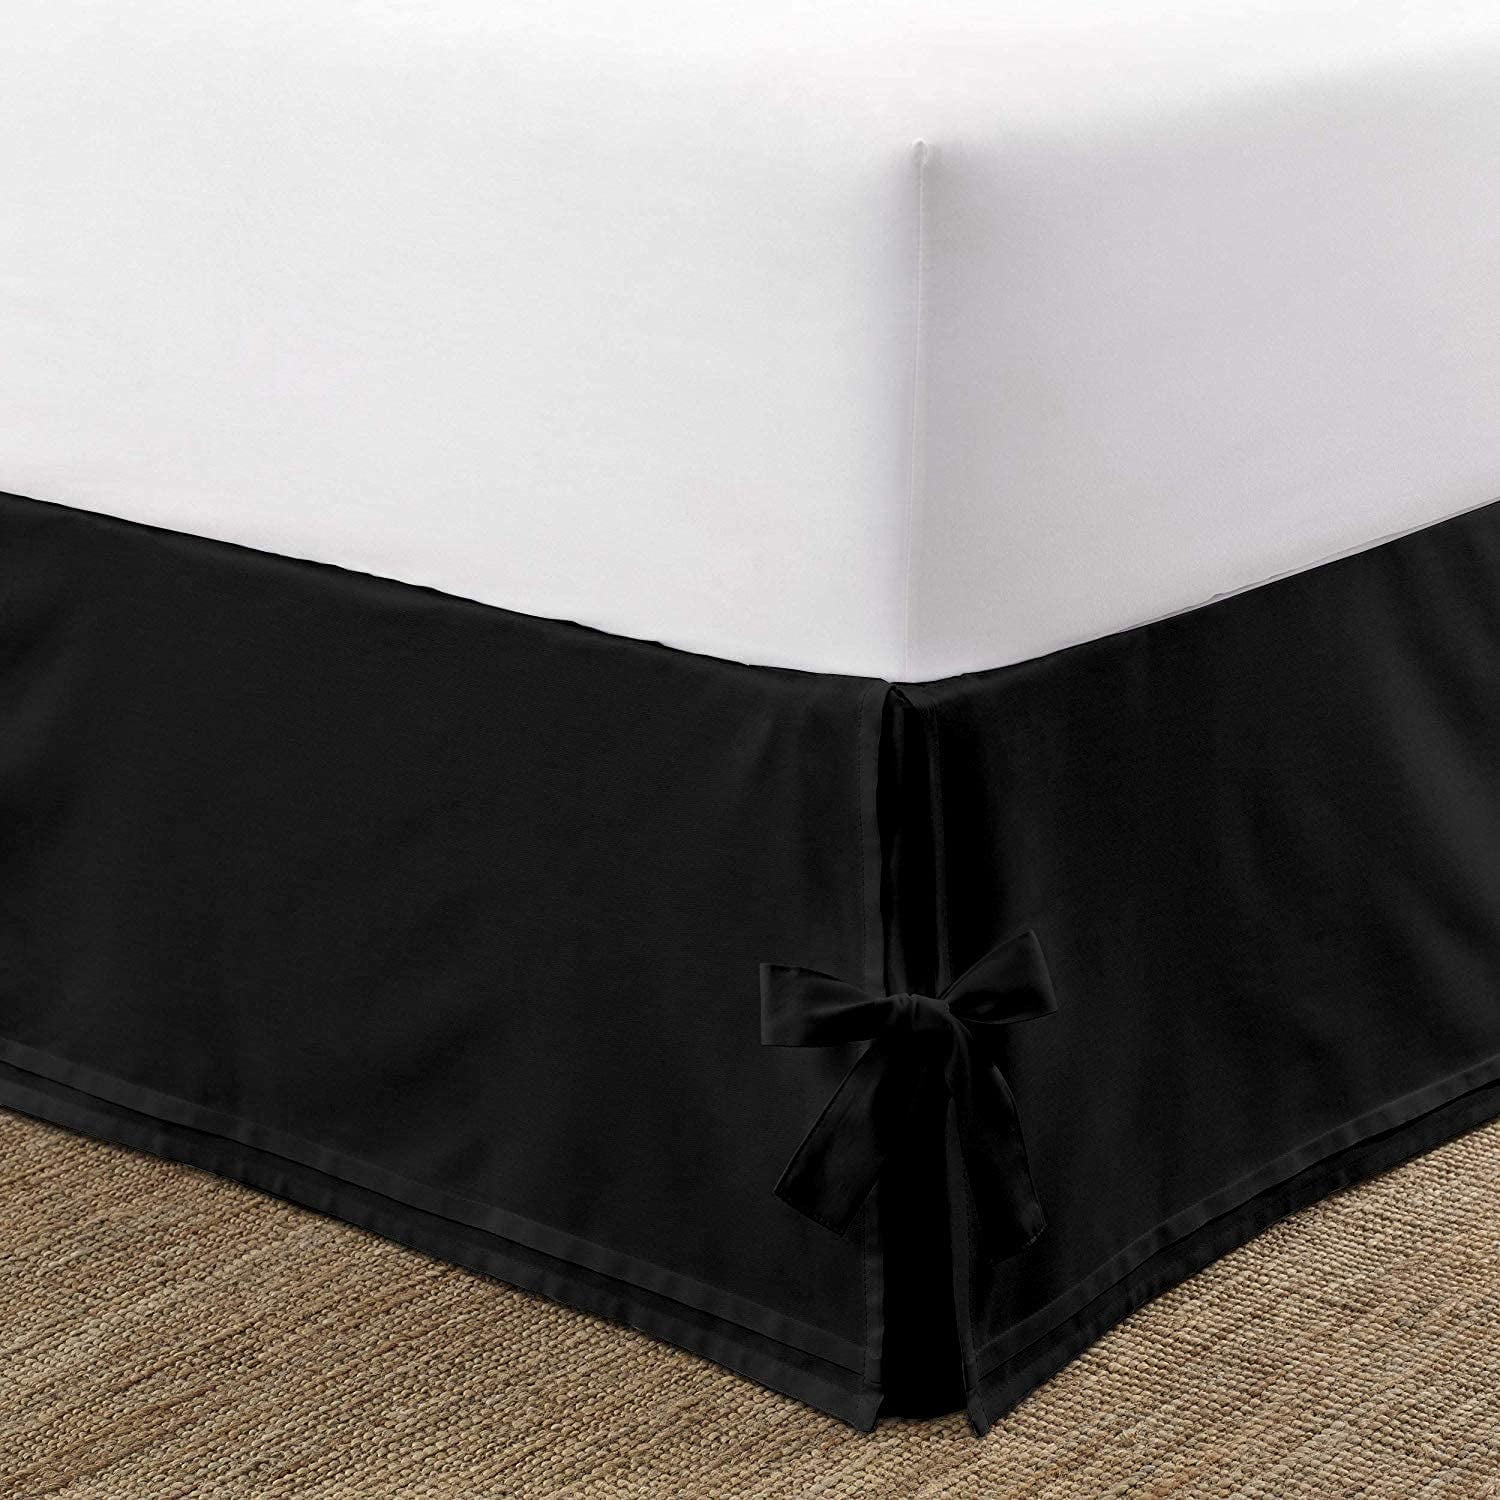 14" DROP SOLID EASY FIT SET UP PLEATED ALL CORNERS 1 PC BED SKIRT IVORY C-KING 